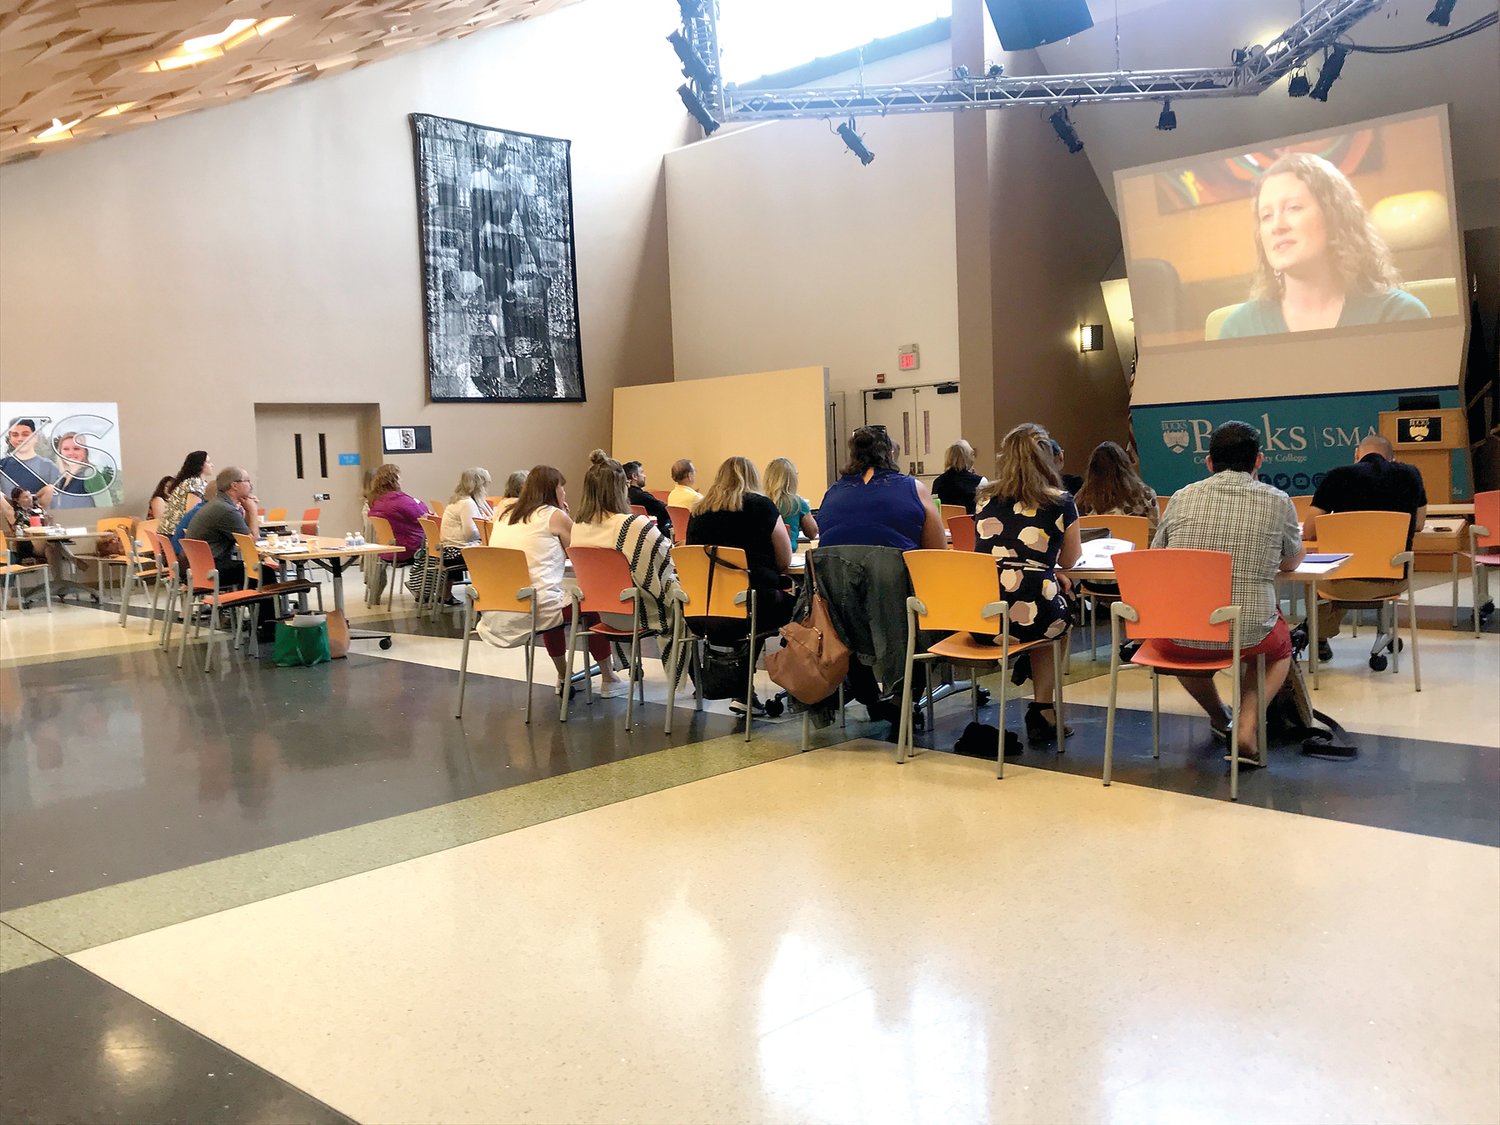 Clergy members from Bucks County gather to learn about the “Darkness to Light: Stewards of Children” child abuse education and training program at Bucks County Community College in Newtown. Photograph courtesy of NOVA.